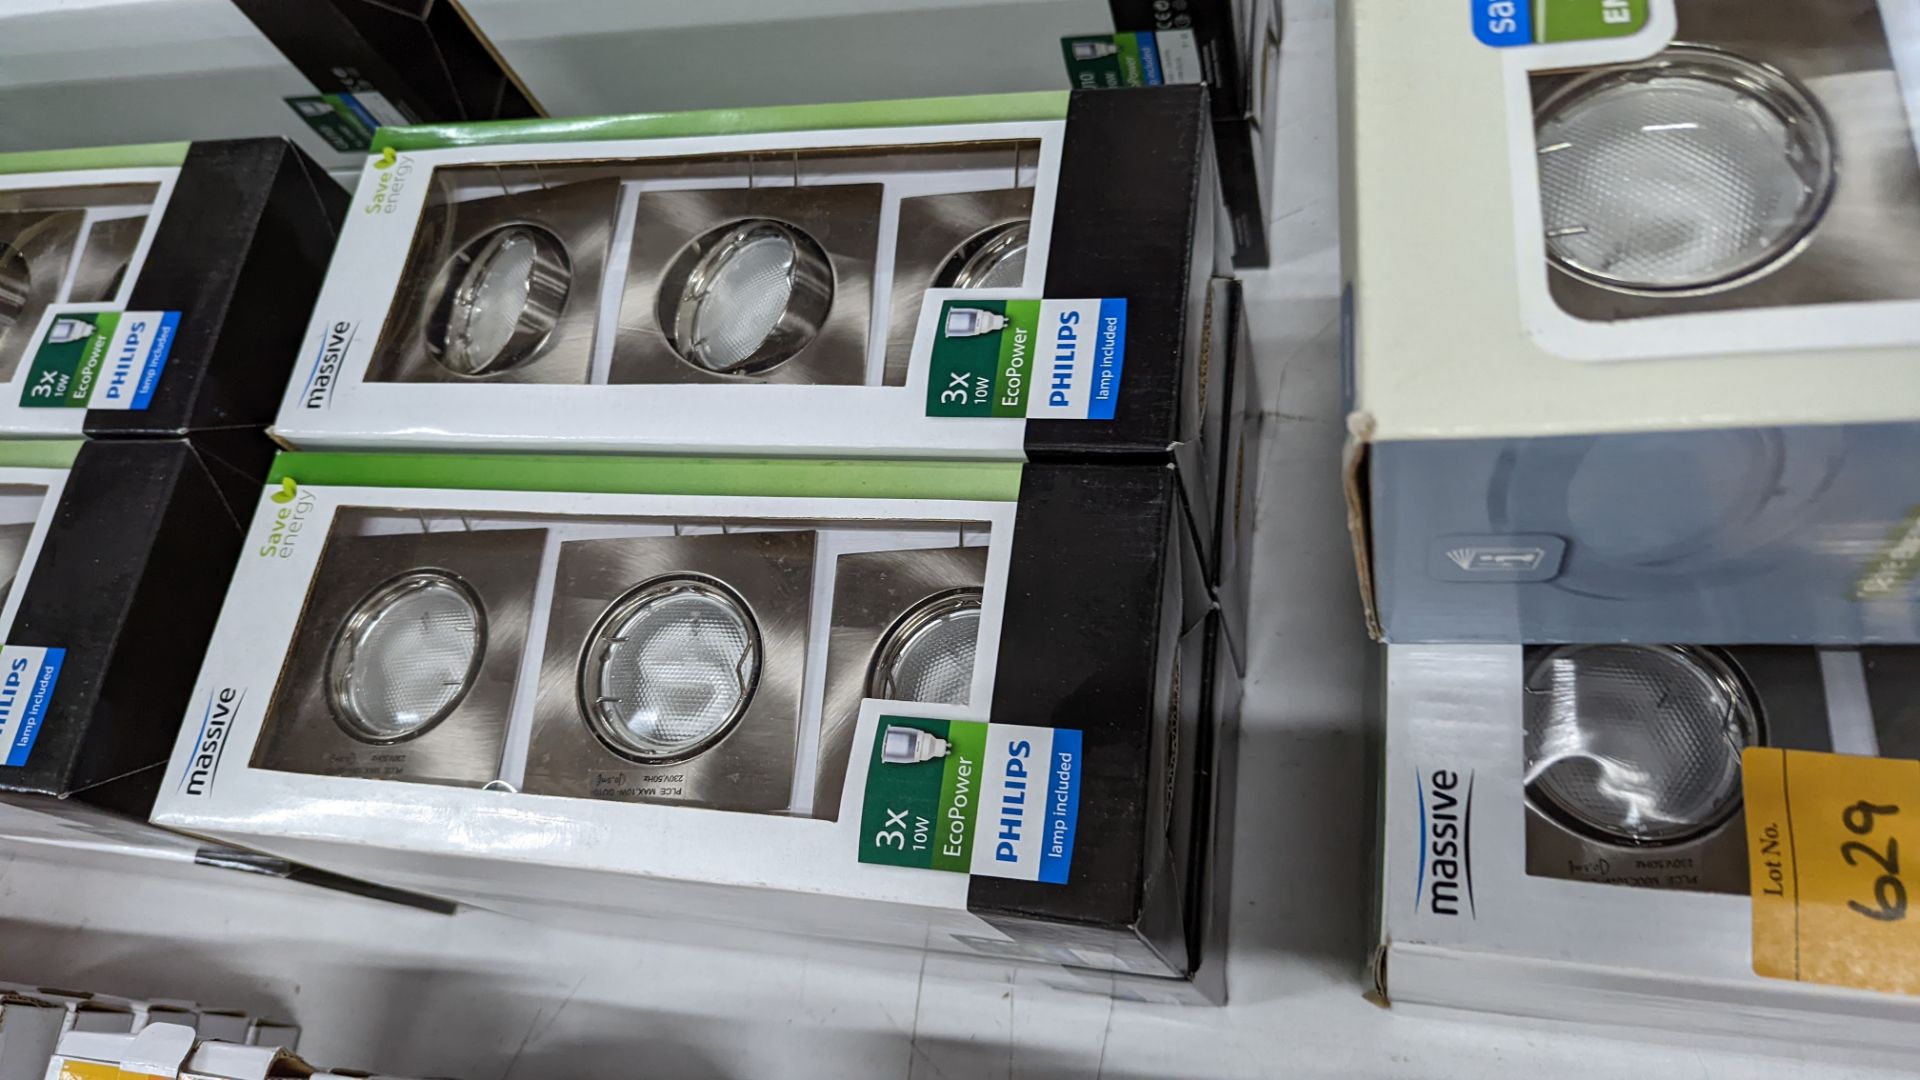 13 off Philips 3x10w Eco Power brushed chrome LED spotlights - this lot consists of 13 boxes which e - Image 3 of 4